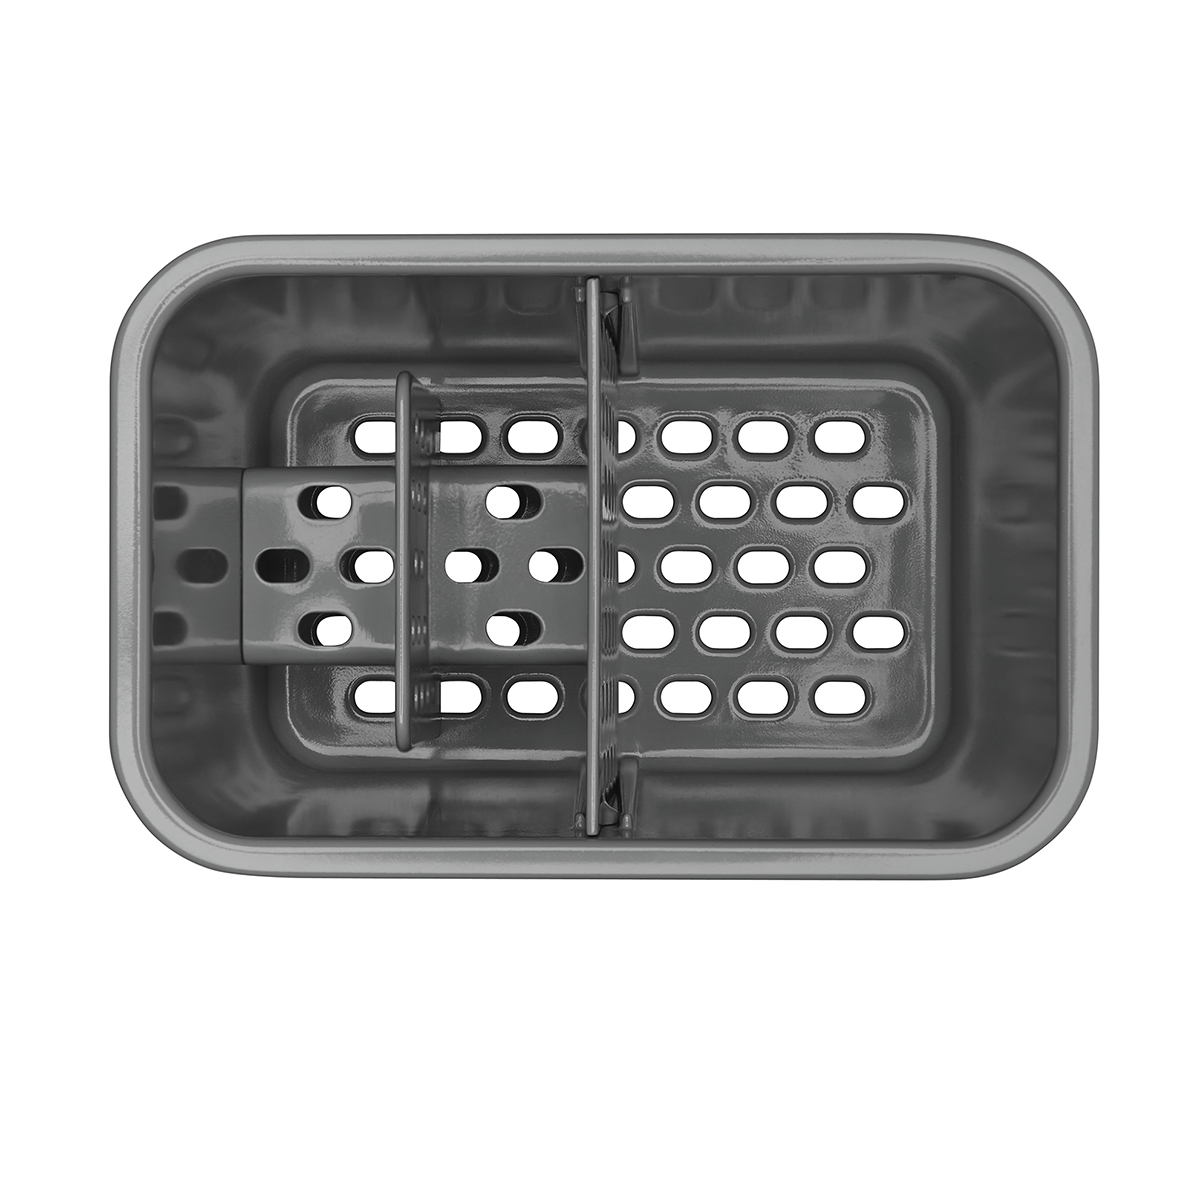 https://www.containerstore.com/catalogimages/317726/10071756-OXO-Stainless-Steel-Sink-Ca.jpg